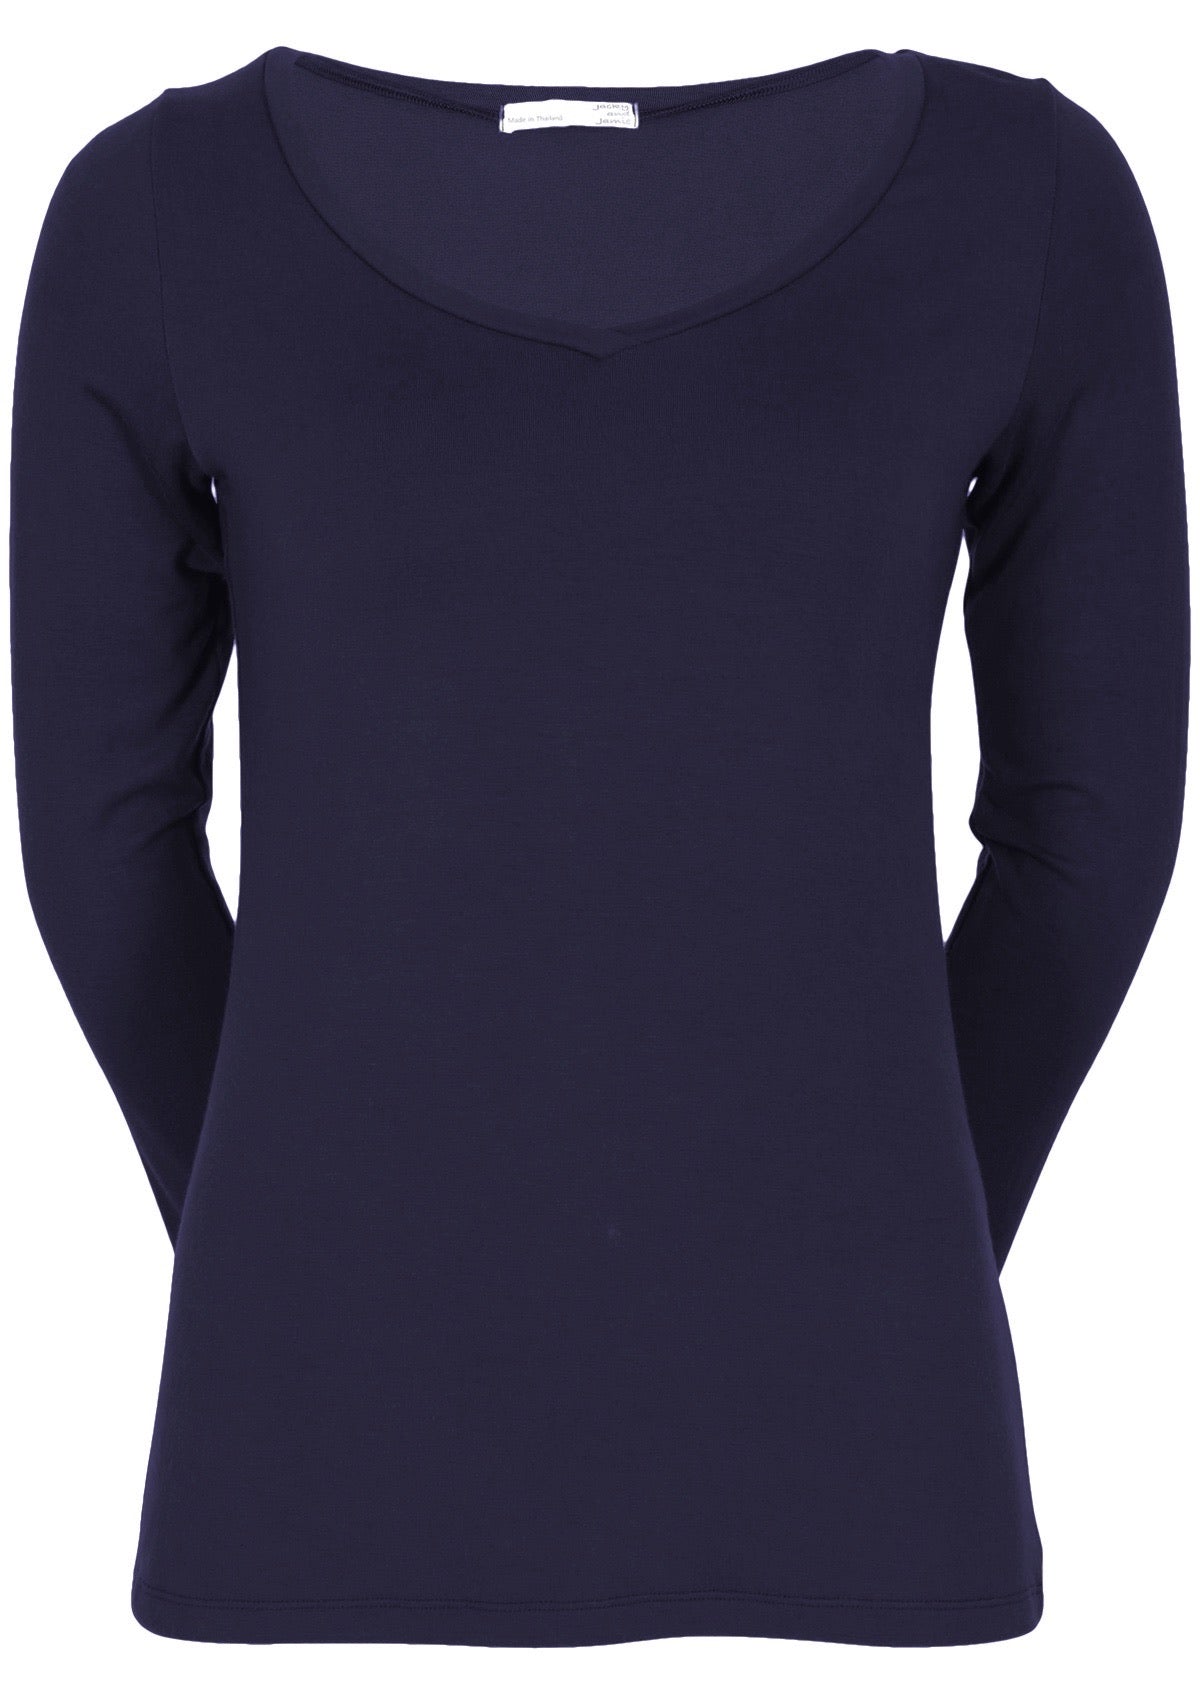 Front view of women's navy blue long sleeve stretch v-neck soft rayon top.